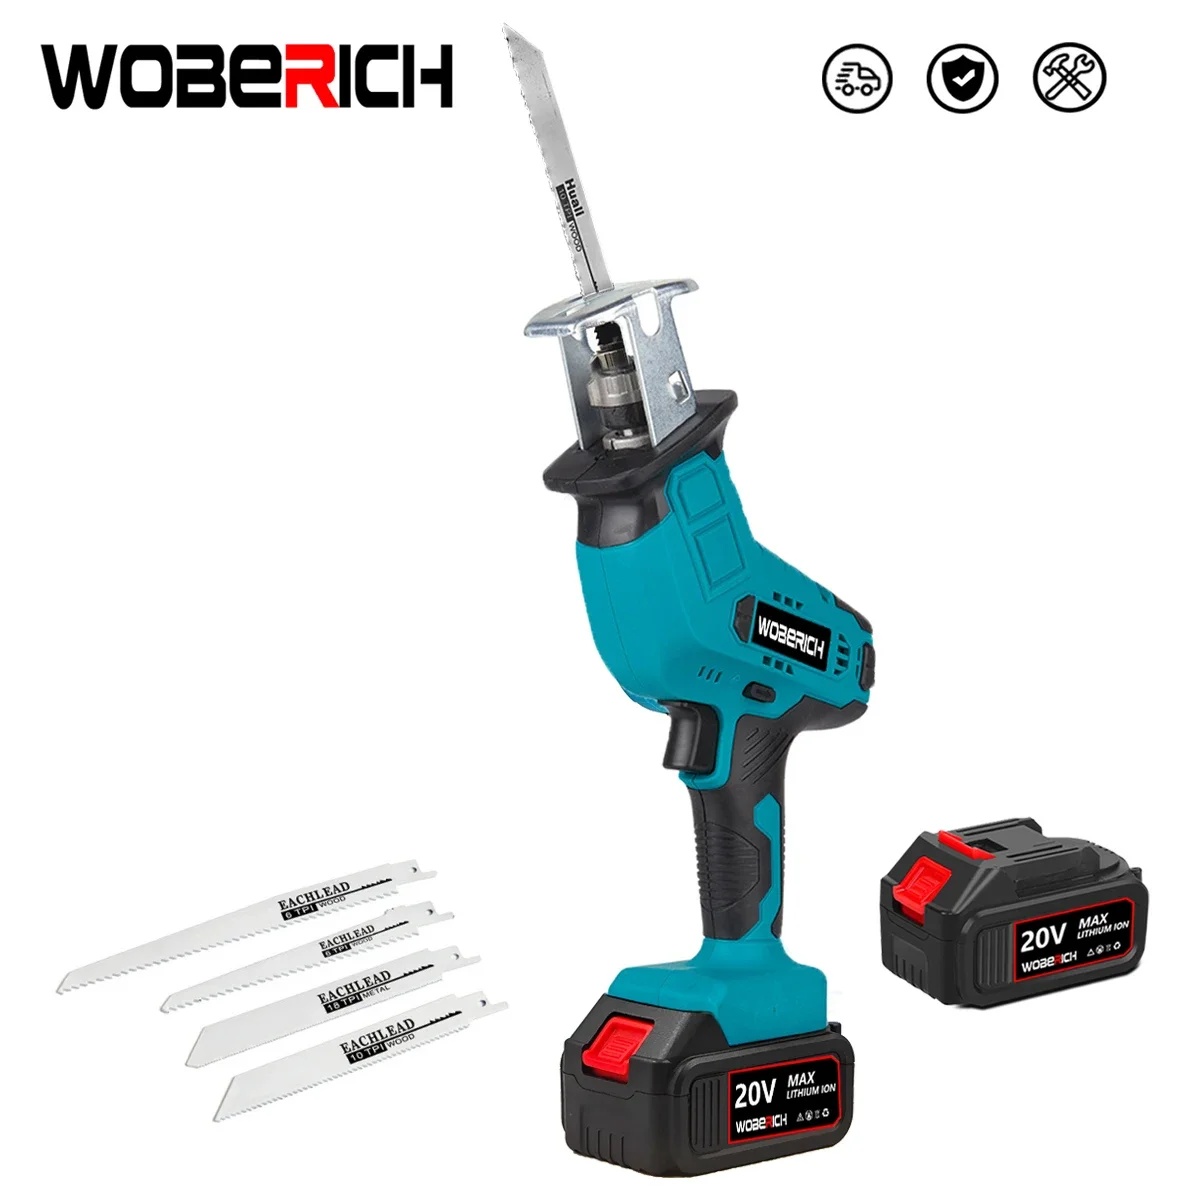 Cordless Reciprocating Saw 18V Adjustable Speed Electric Saw Wood Metal PVC Pipe Cutting fit Makita 18v Battery By WOBERICH